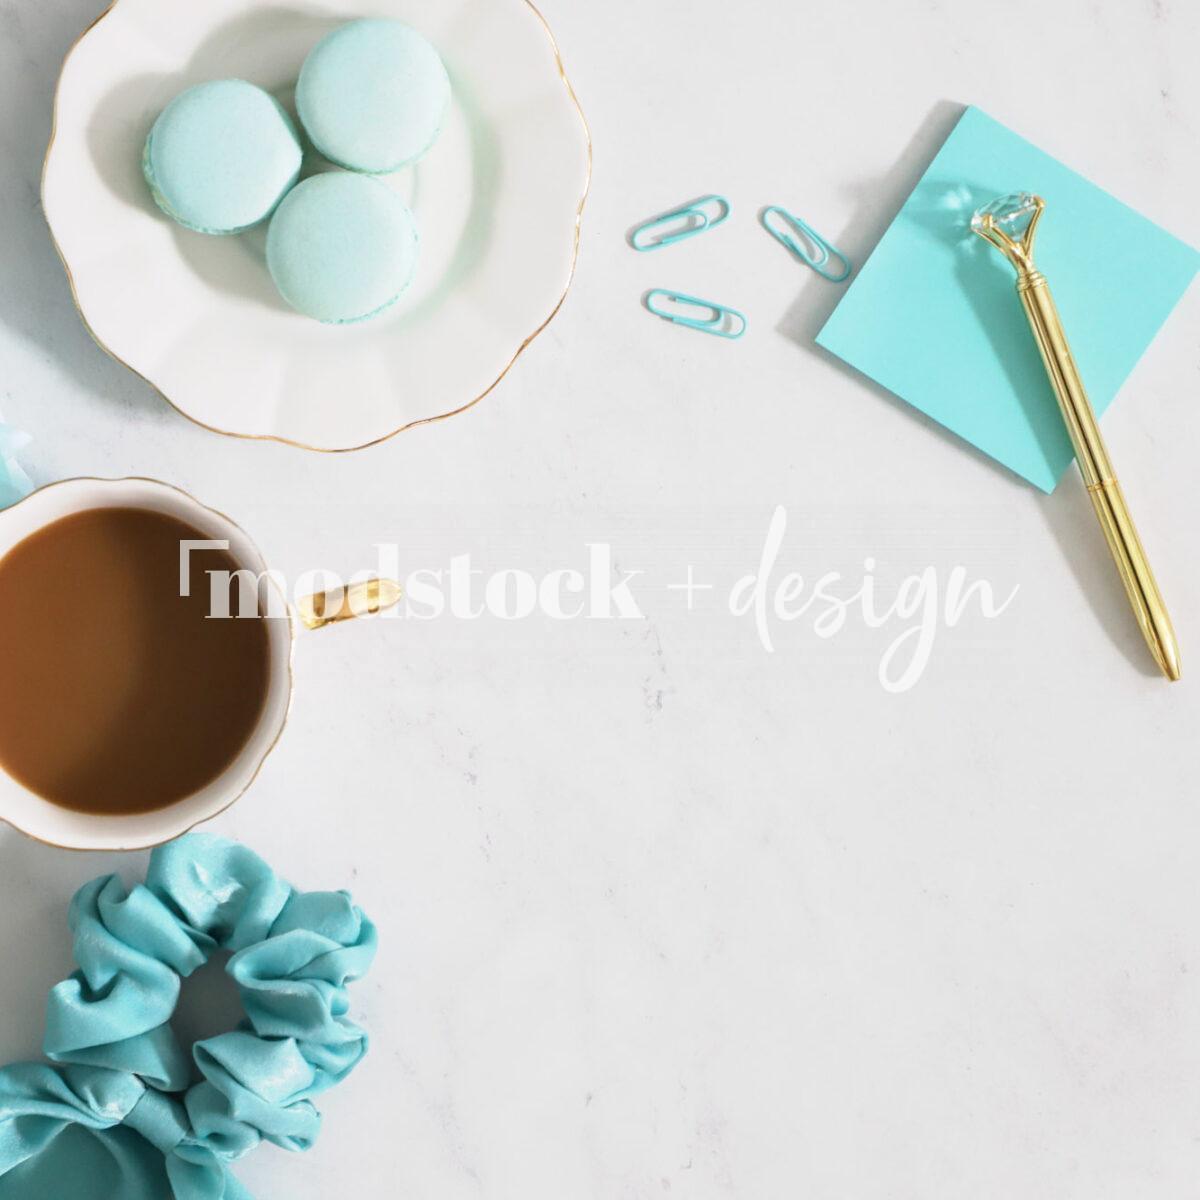 Modstock Luxe Teal Workspace - Gold 22